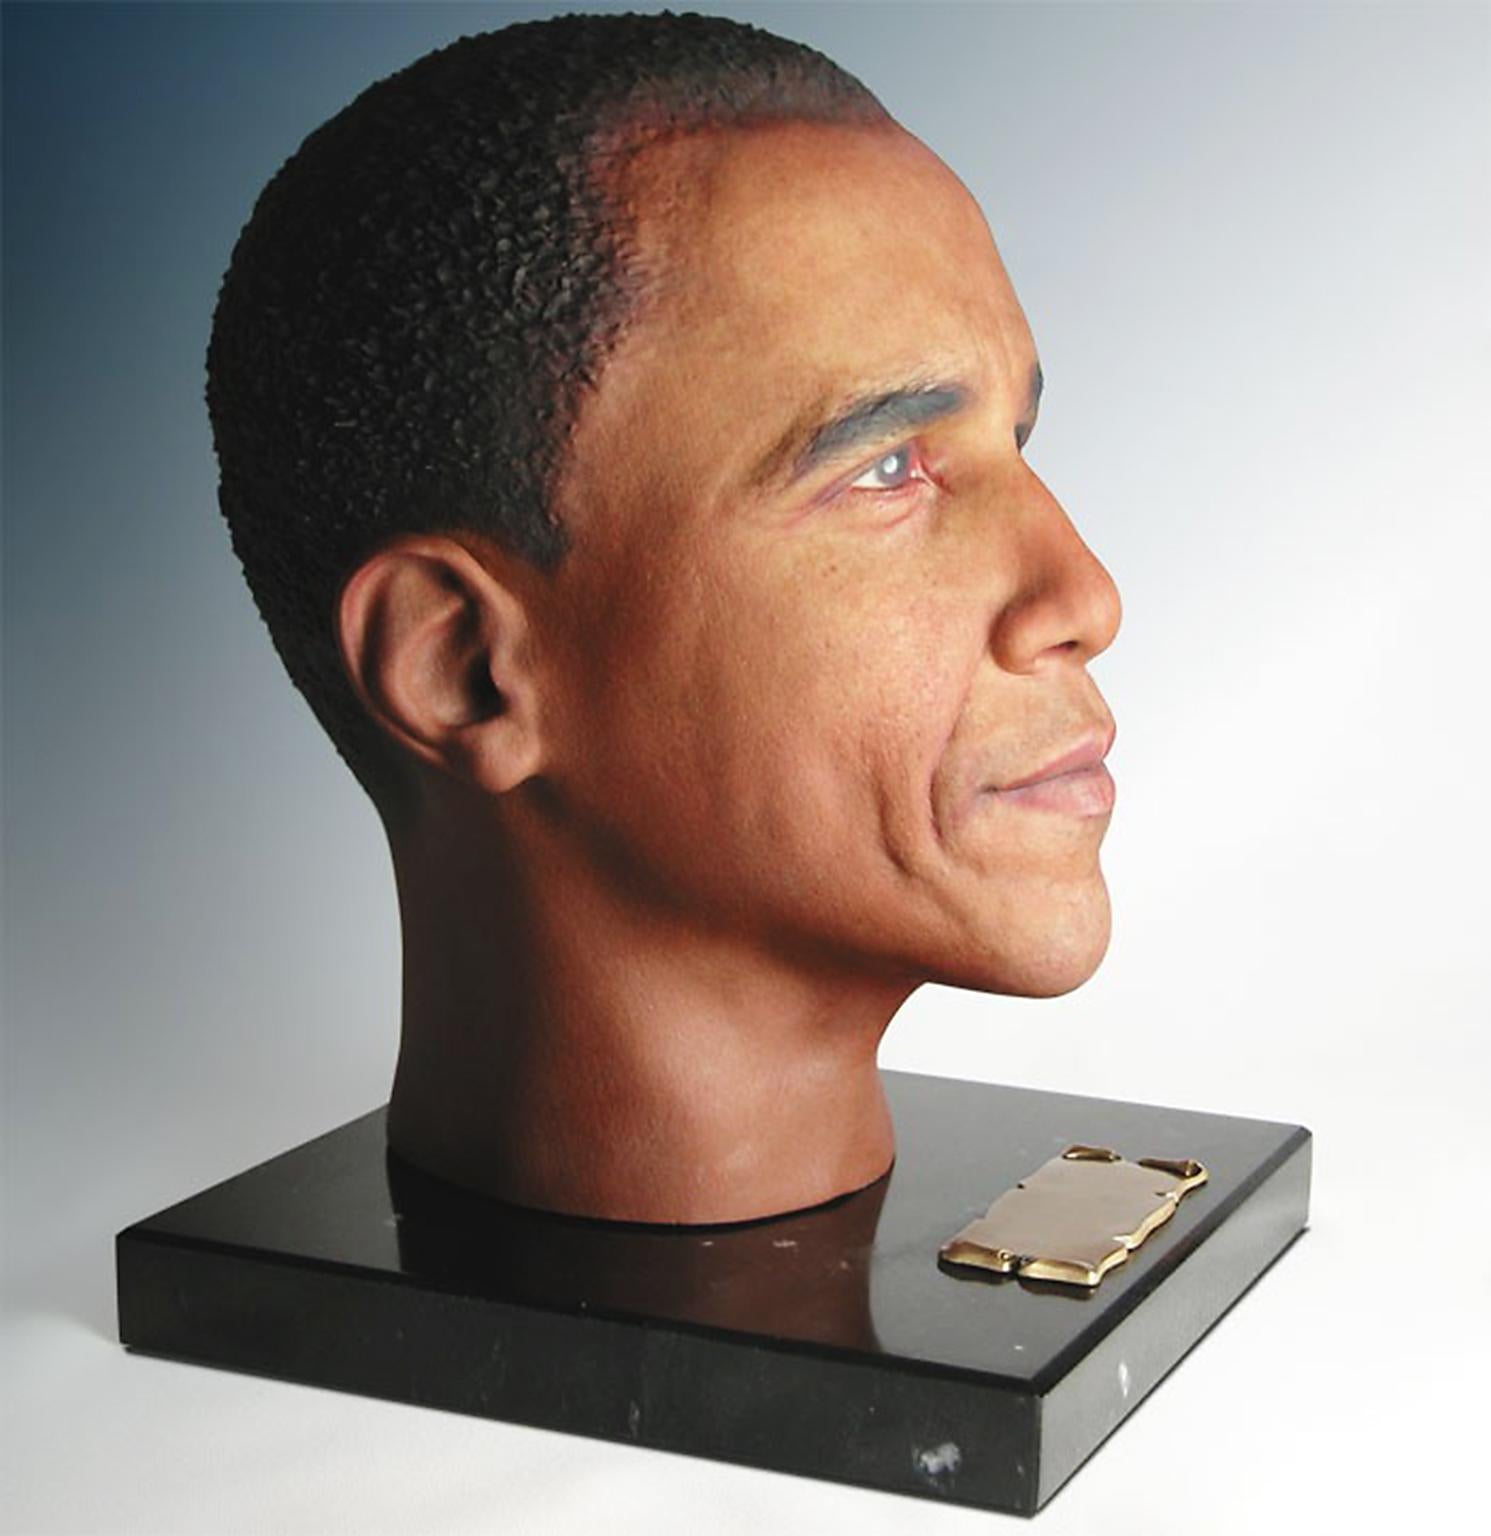 &#13;
‘I wanted to get a nice sample, to display at funeral conventions and things. They were gonna do a George Clooney head for me,’ Staab says. ‘When I opened the box, it’s Obama’s head’ &#13;